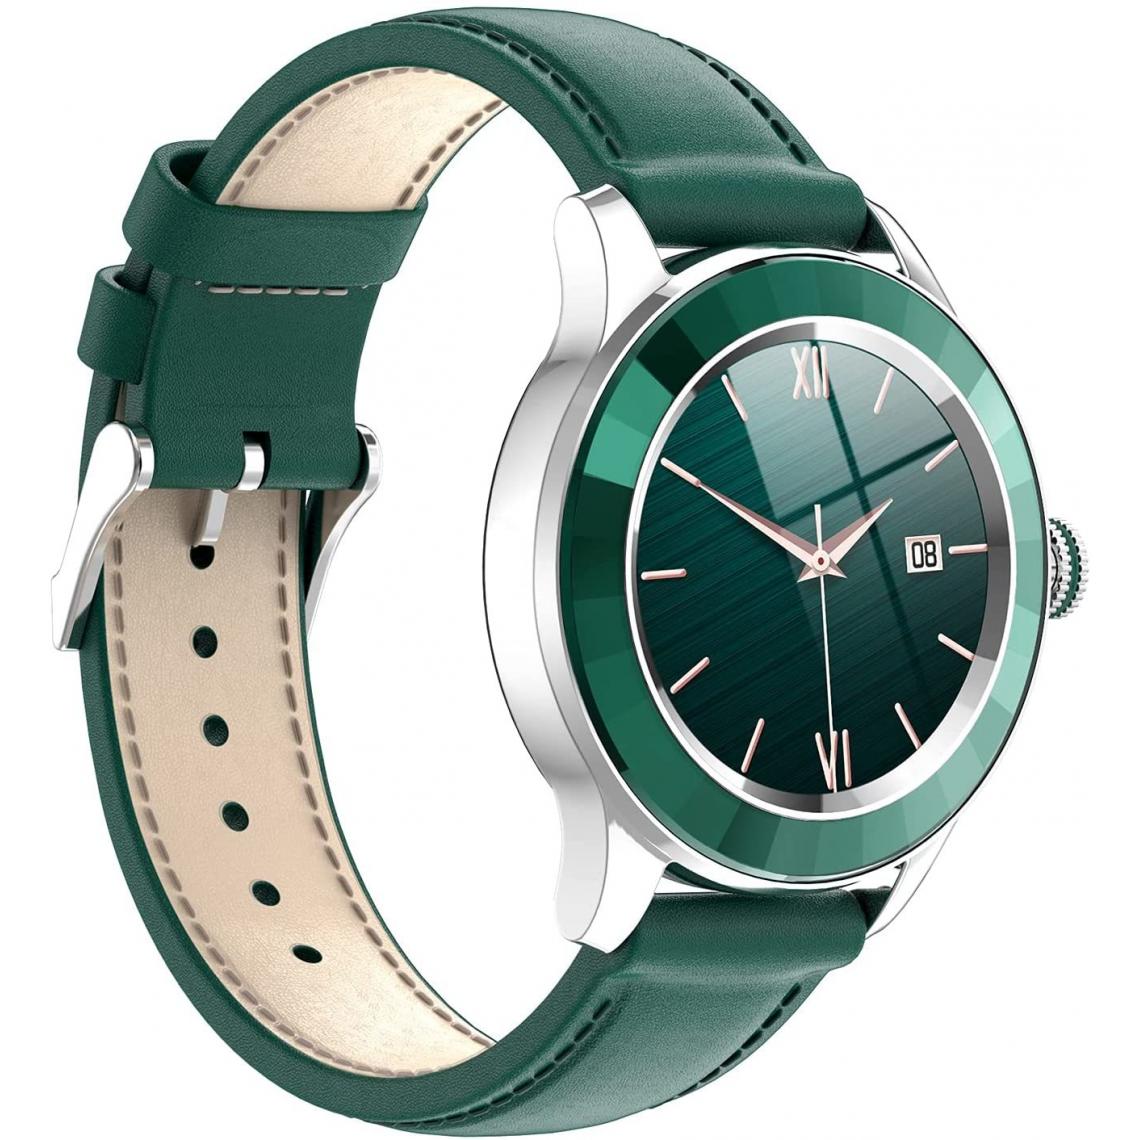 Chronotech Montres - Chronus Smart Watch women elegant high quality IP67 waterproof with fitness tracker, heart rate sleep monitor, calorie step counter(Green) - Montre connectée